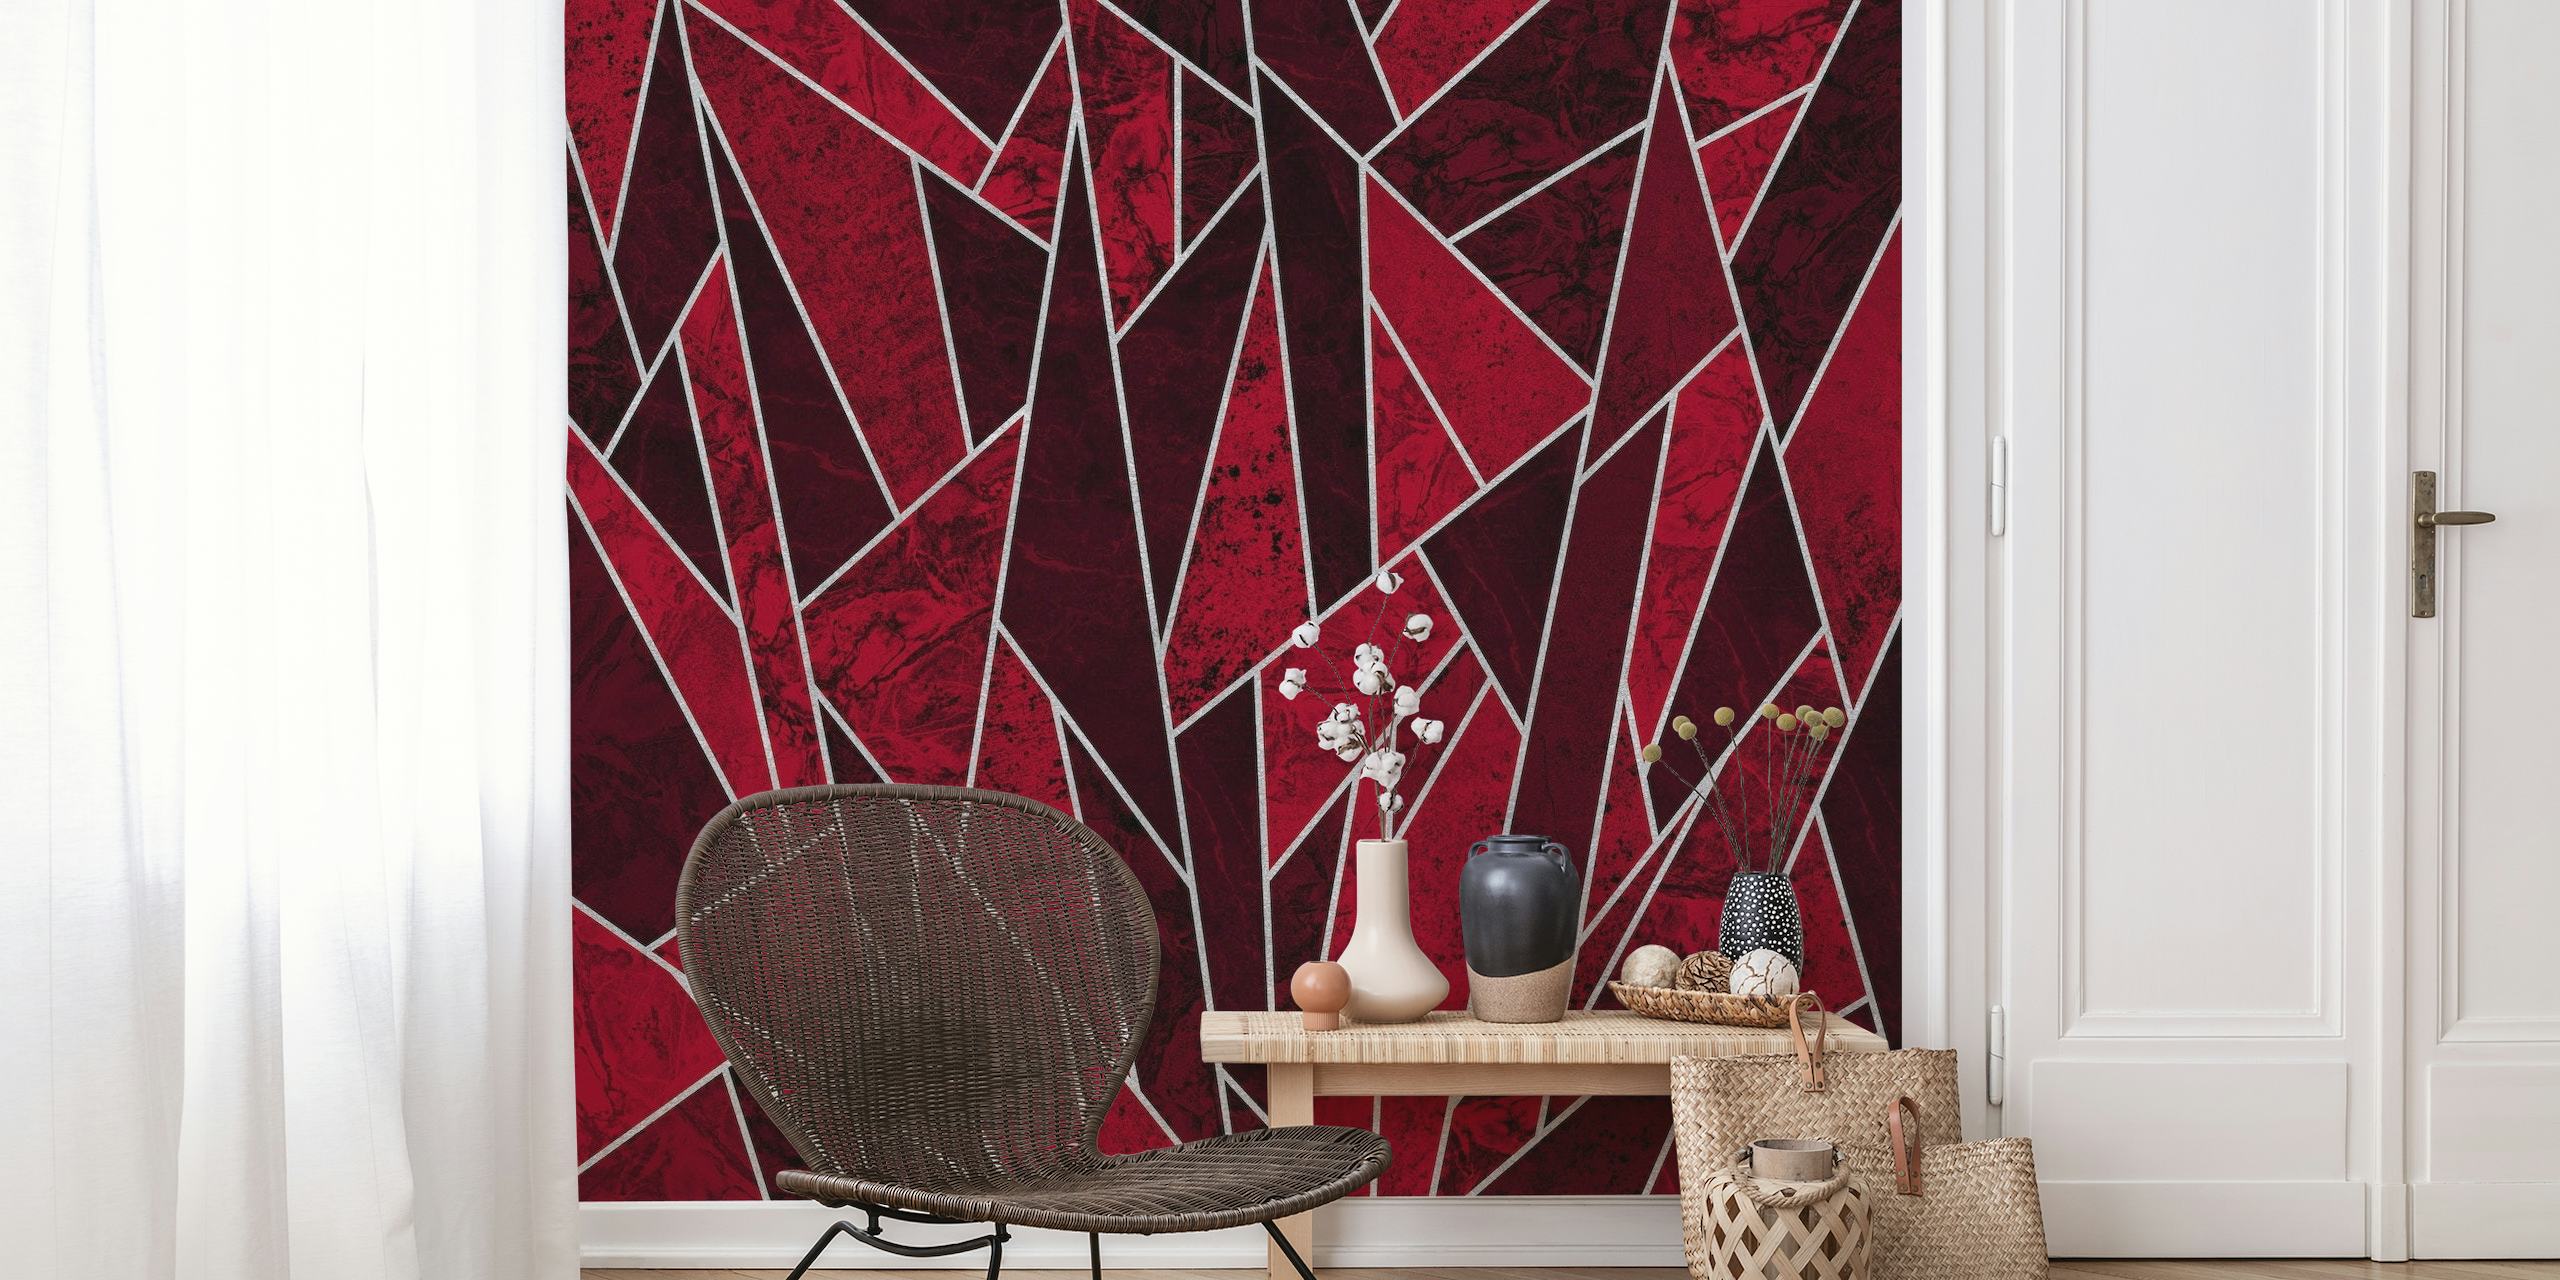 Shattered Red Ruby Mosaic behang